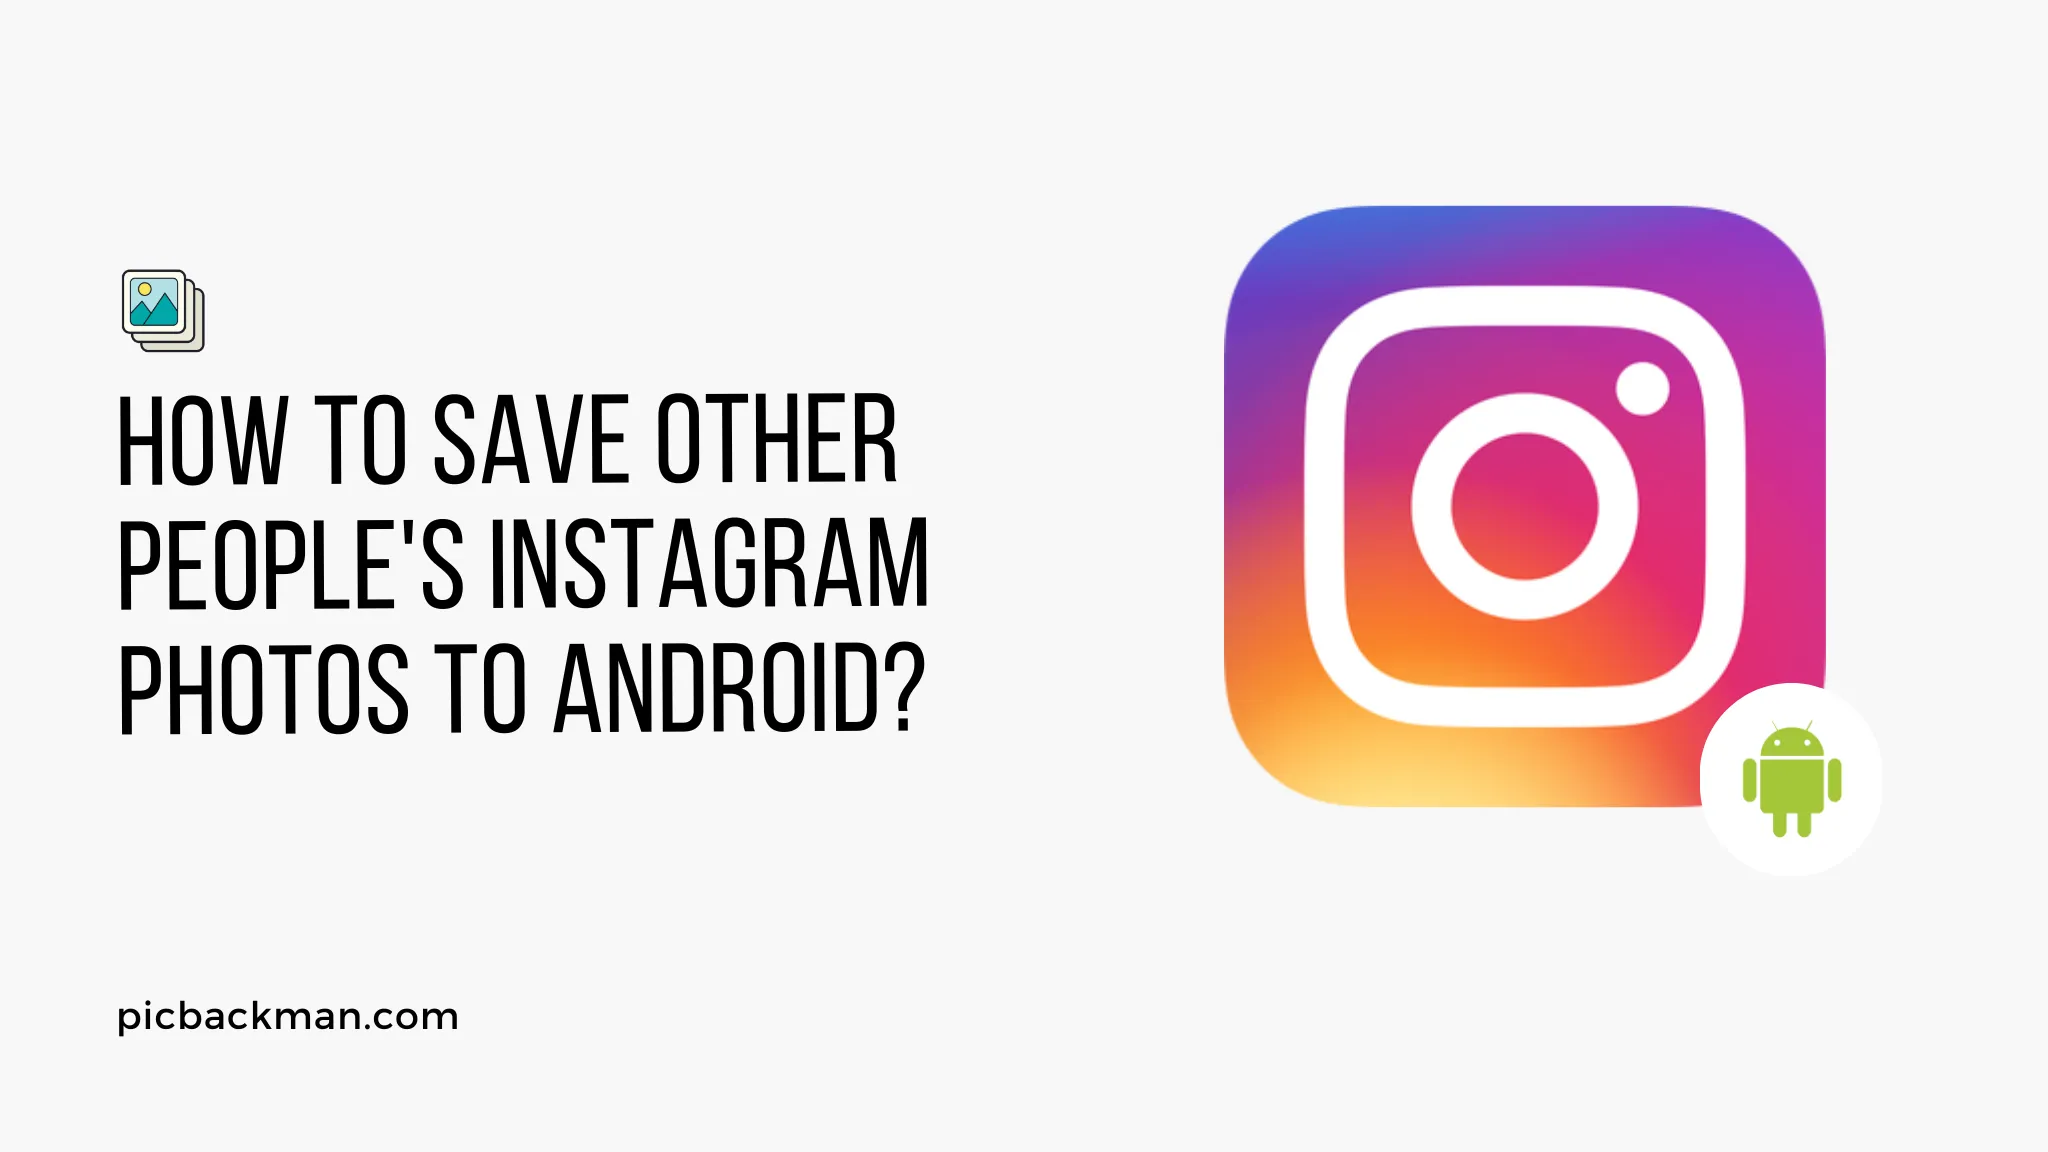 How to Save Other People's Instagram Photos to Android